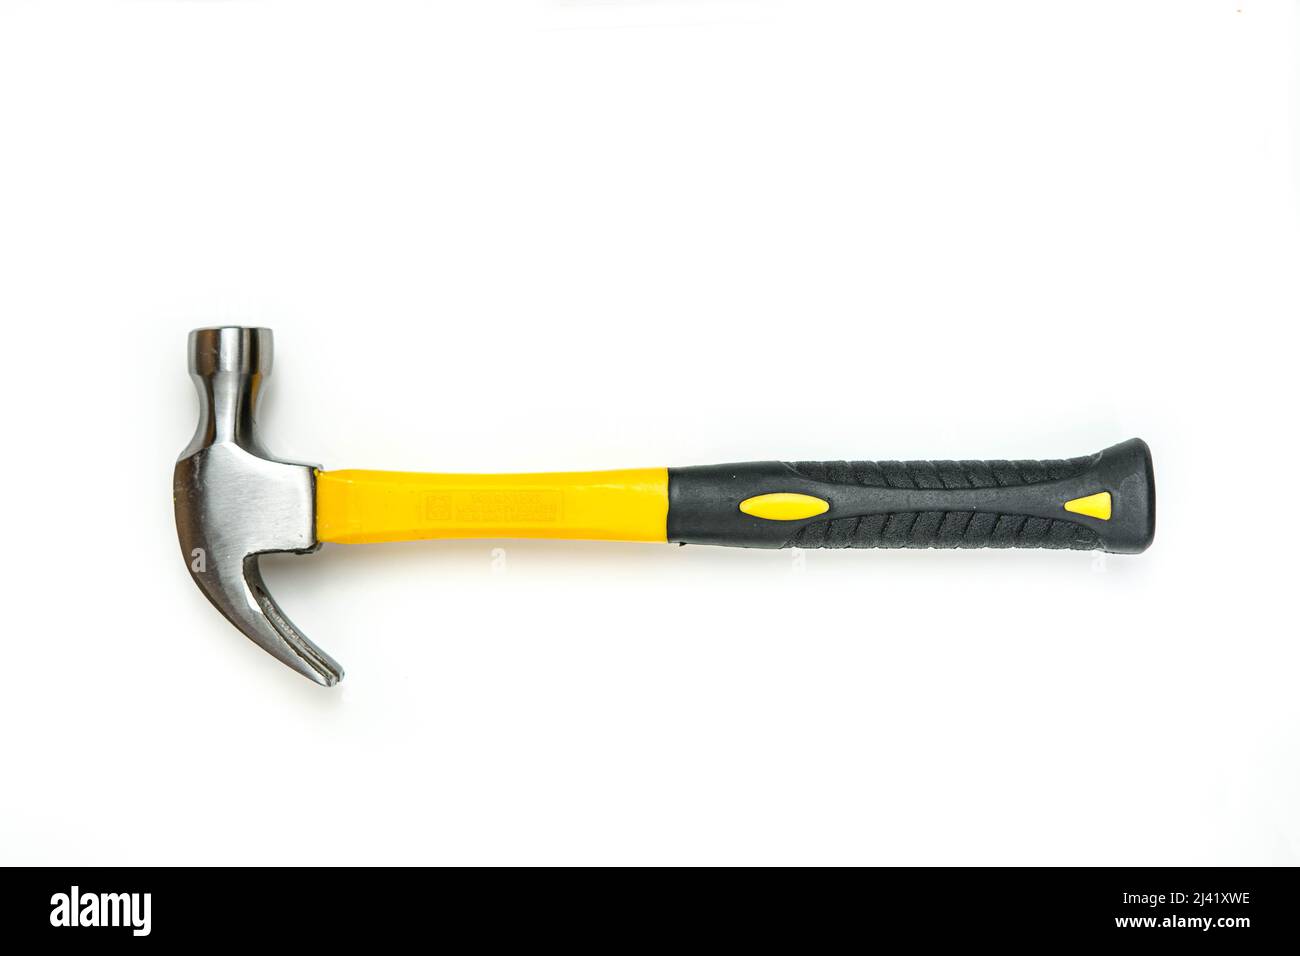 Top down shot of a small yellow handle claw hammer Stock Photo